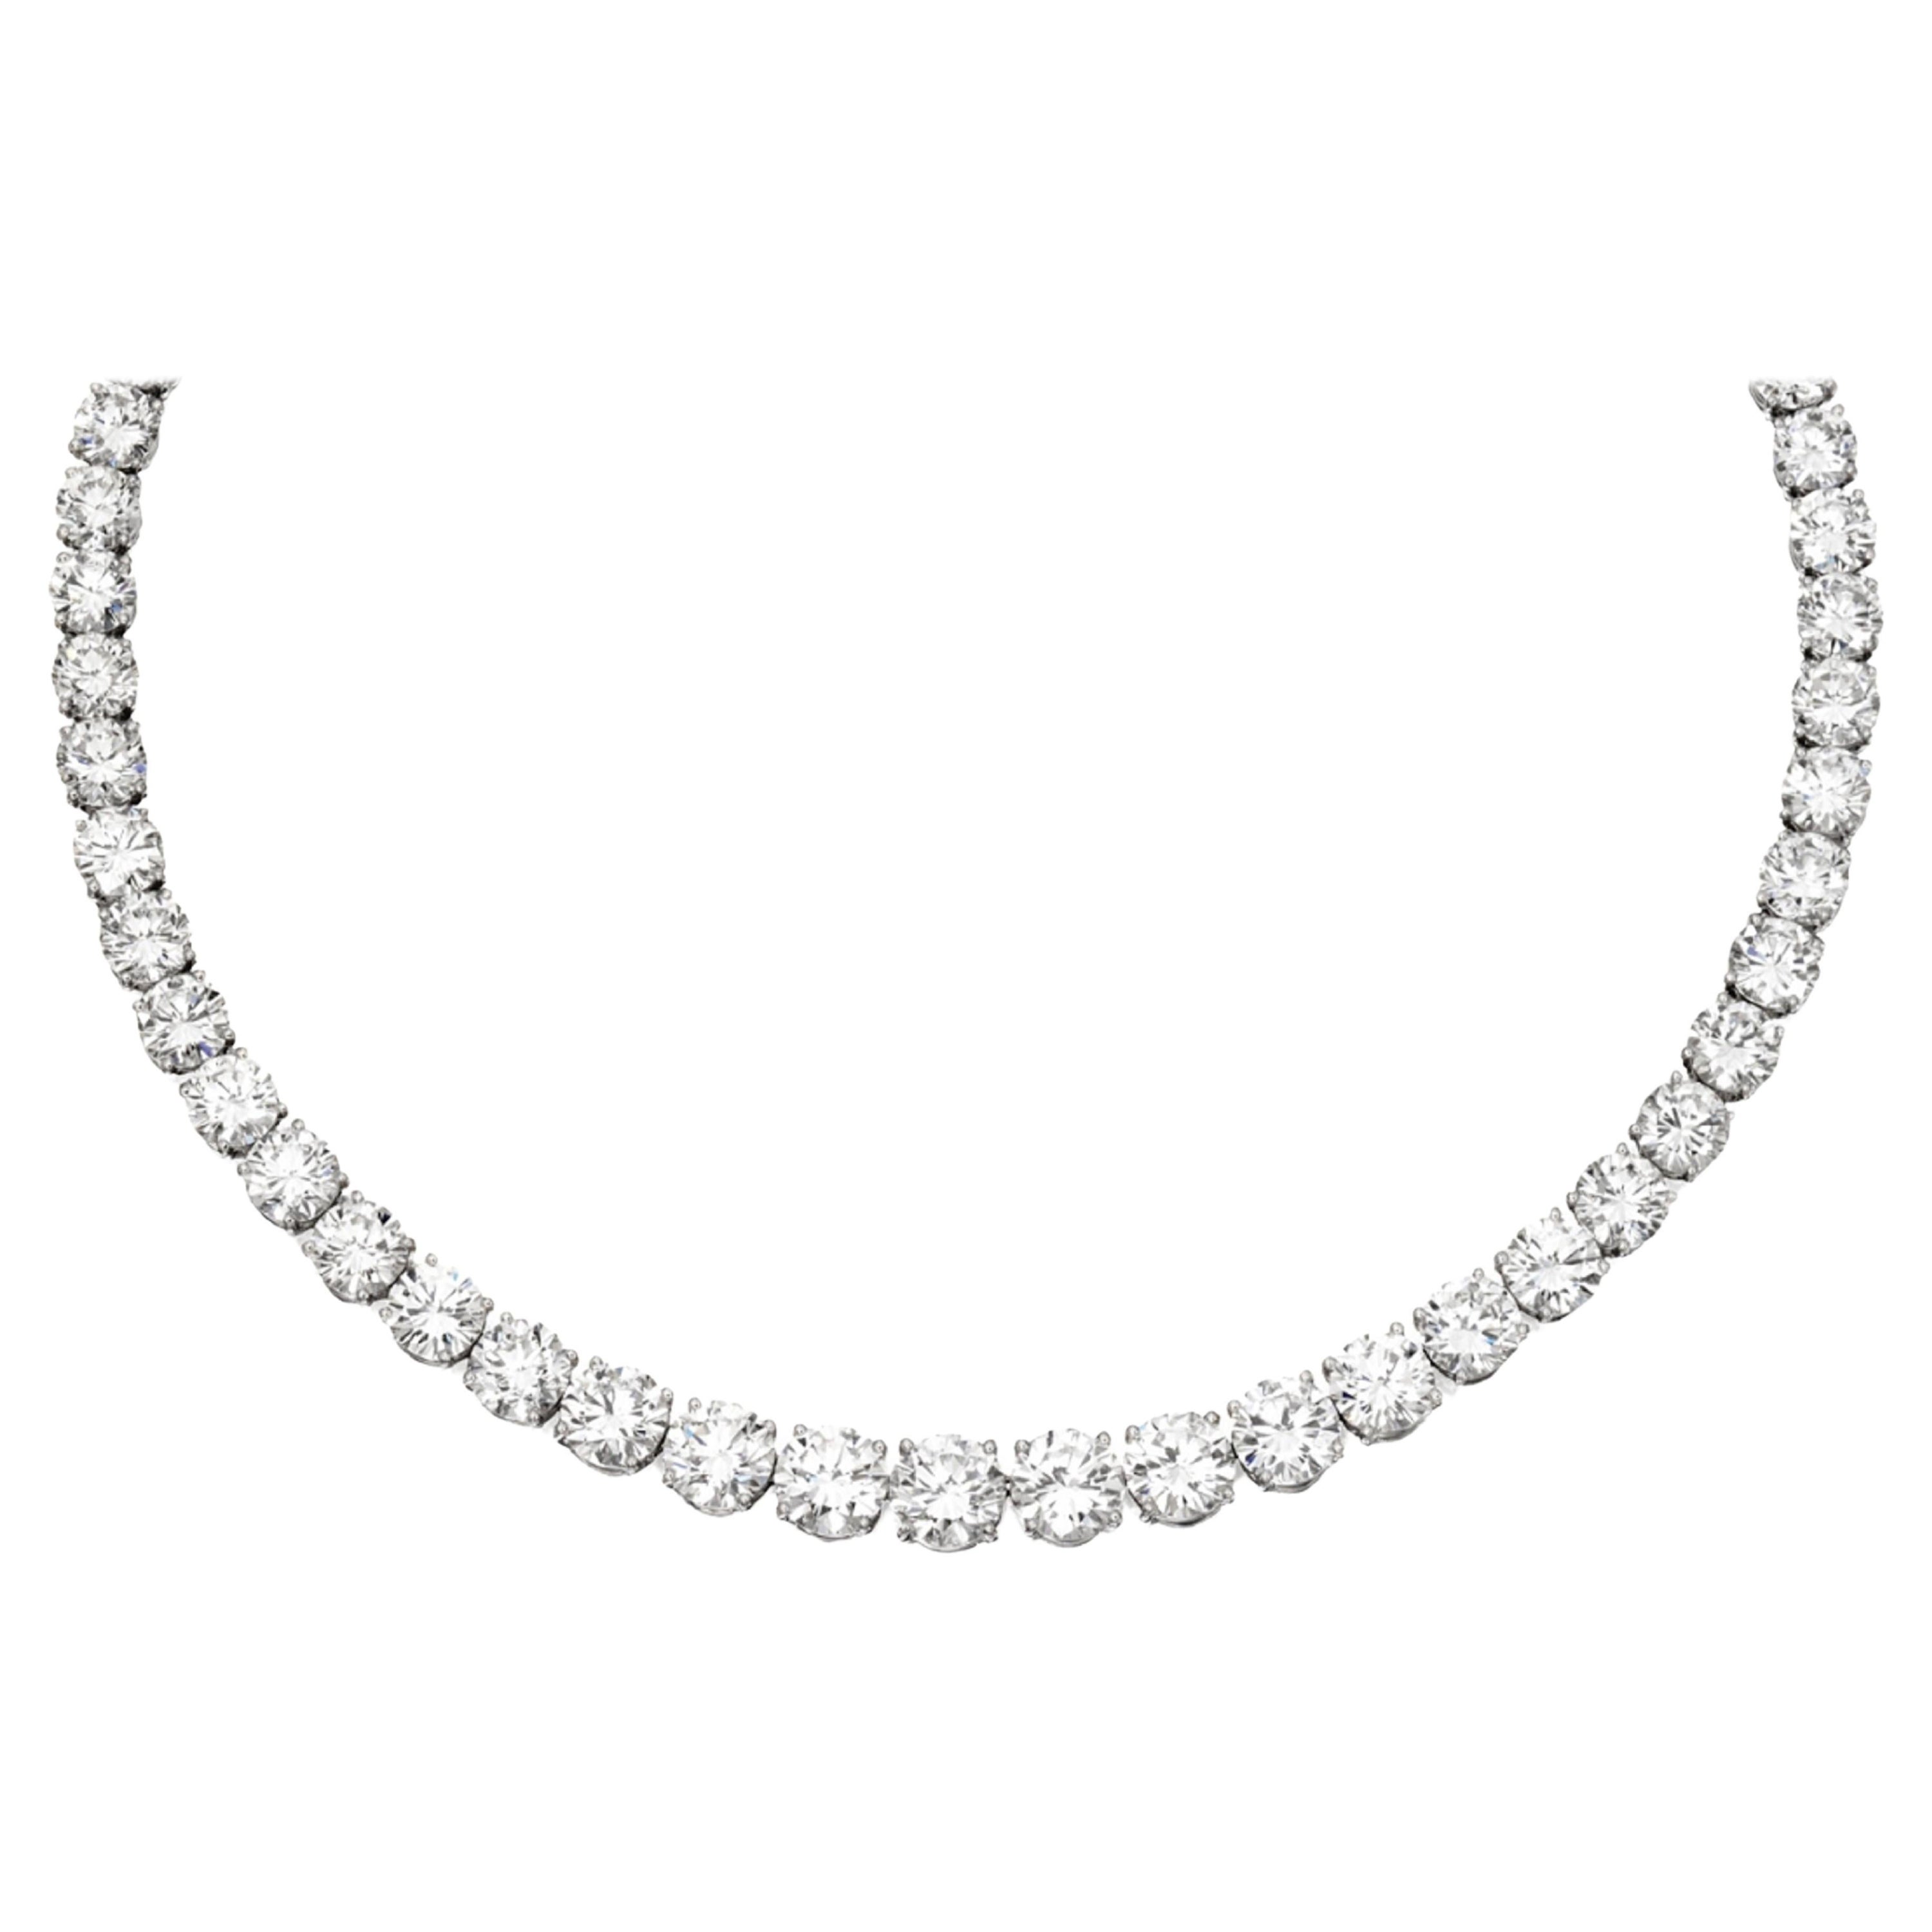 An exquisite 45 carat riviera tennis necklace 
F color
clarity SI2-SI3 100% eye clean
